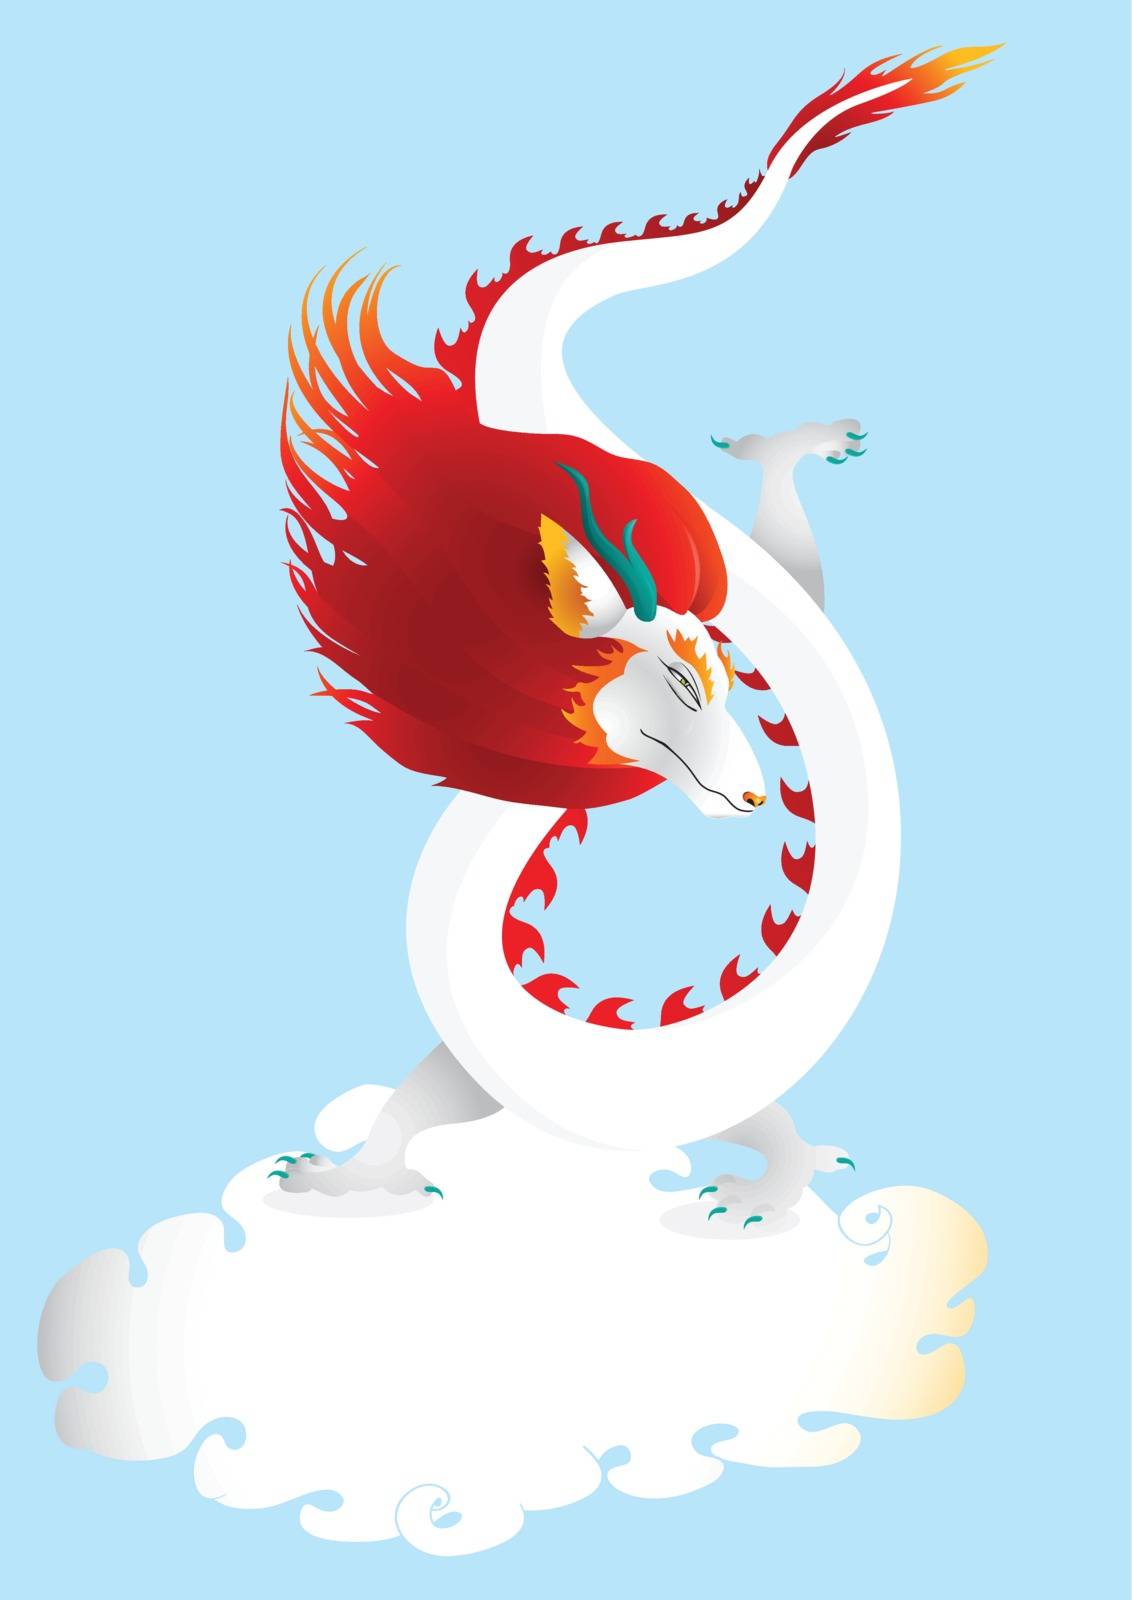 Dragon in the sky with cloud  vector  by akini